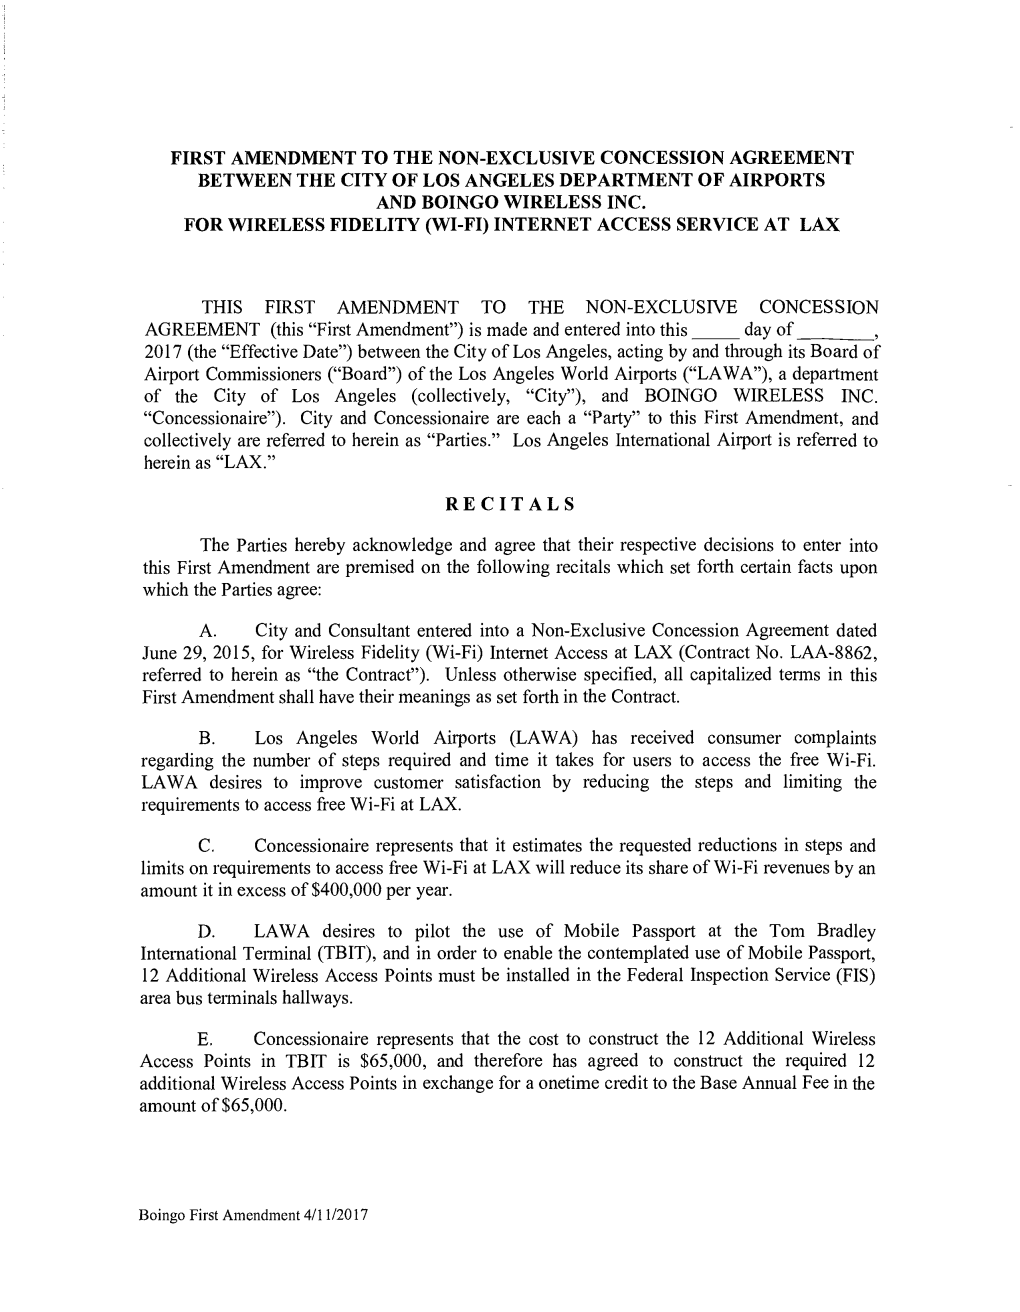 First Amendment to the Non-Exclusive Concession Agreement Between the City of Los Angeles Department of Airports and Boingo Wireless Inc